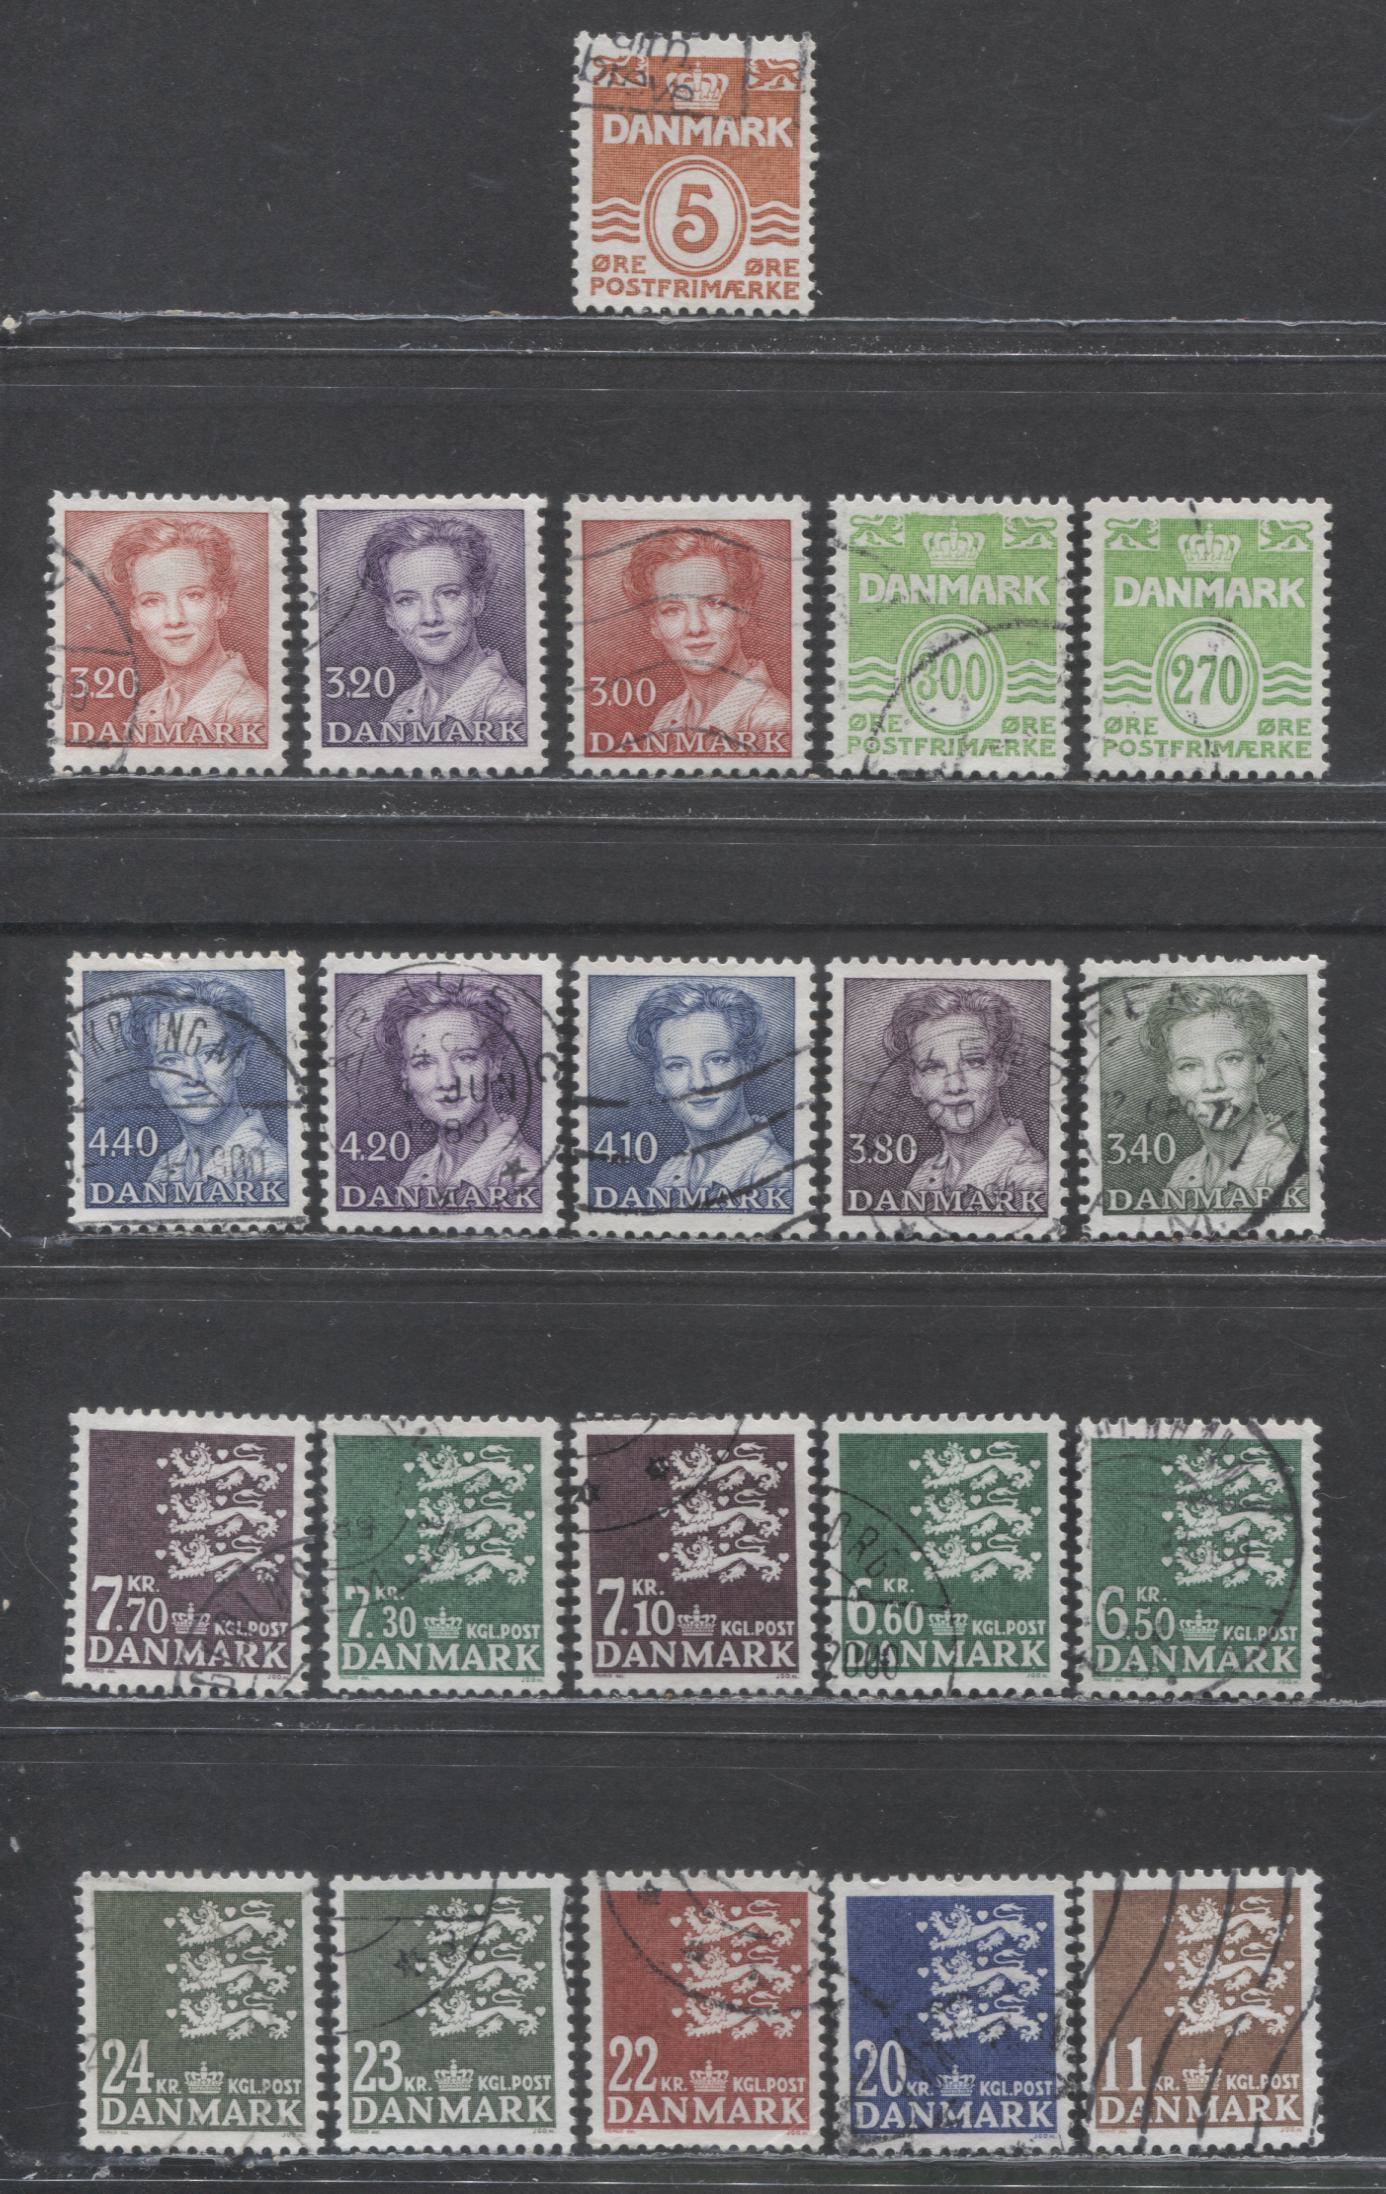 Lot 463 Denmark SC#795/814 1986-1990 Definitives, 21 Fine/Very Fine Used Singles, Click on Listing to See ALL Pictures, 2017 Scott Cat. $44.6 USD